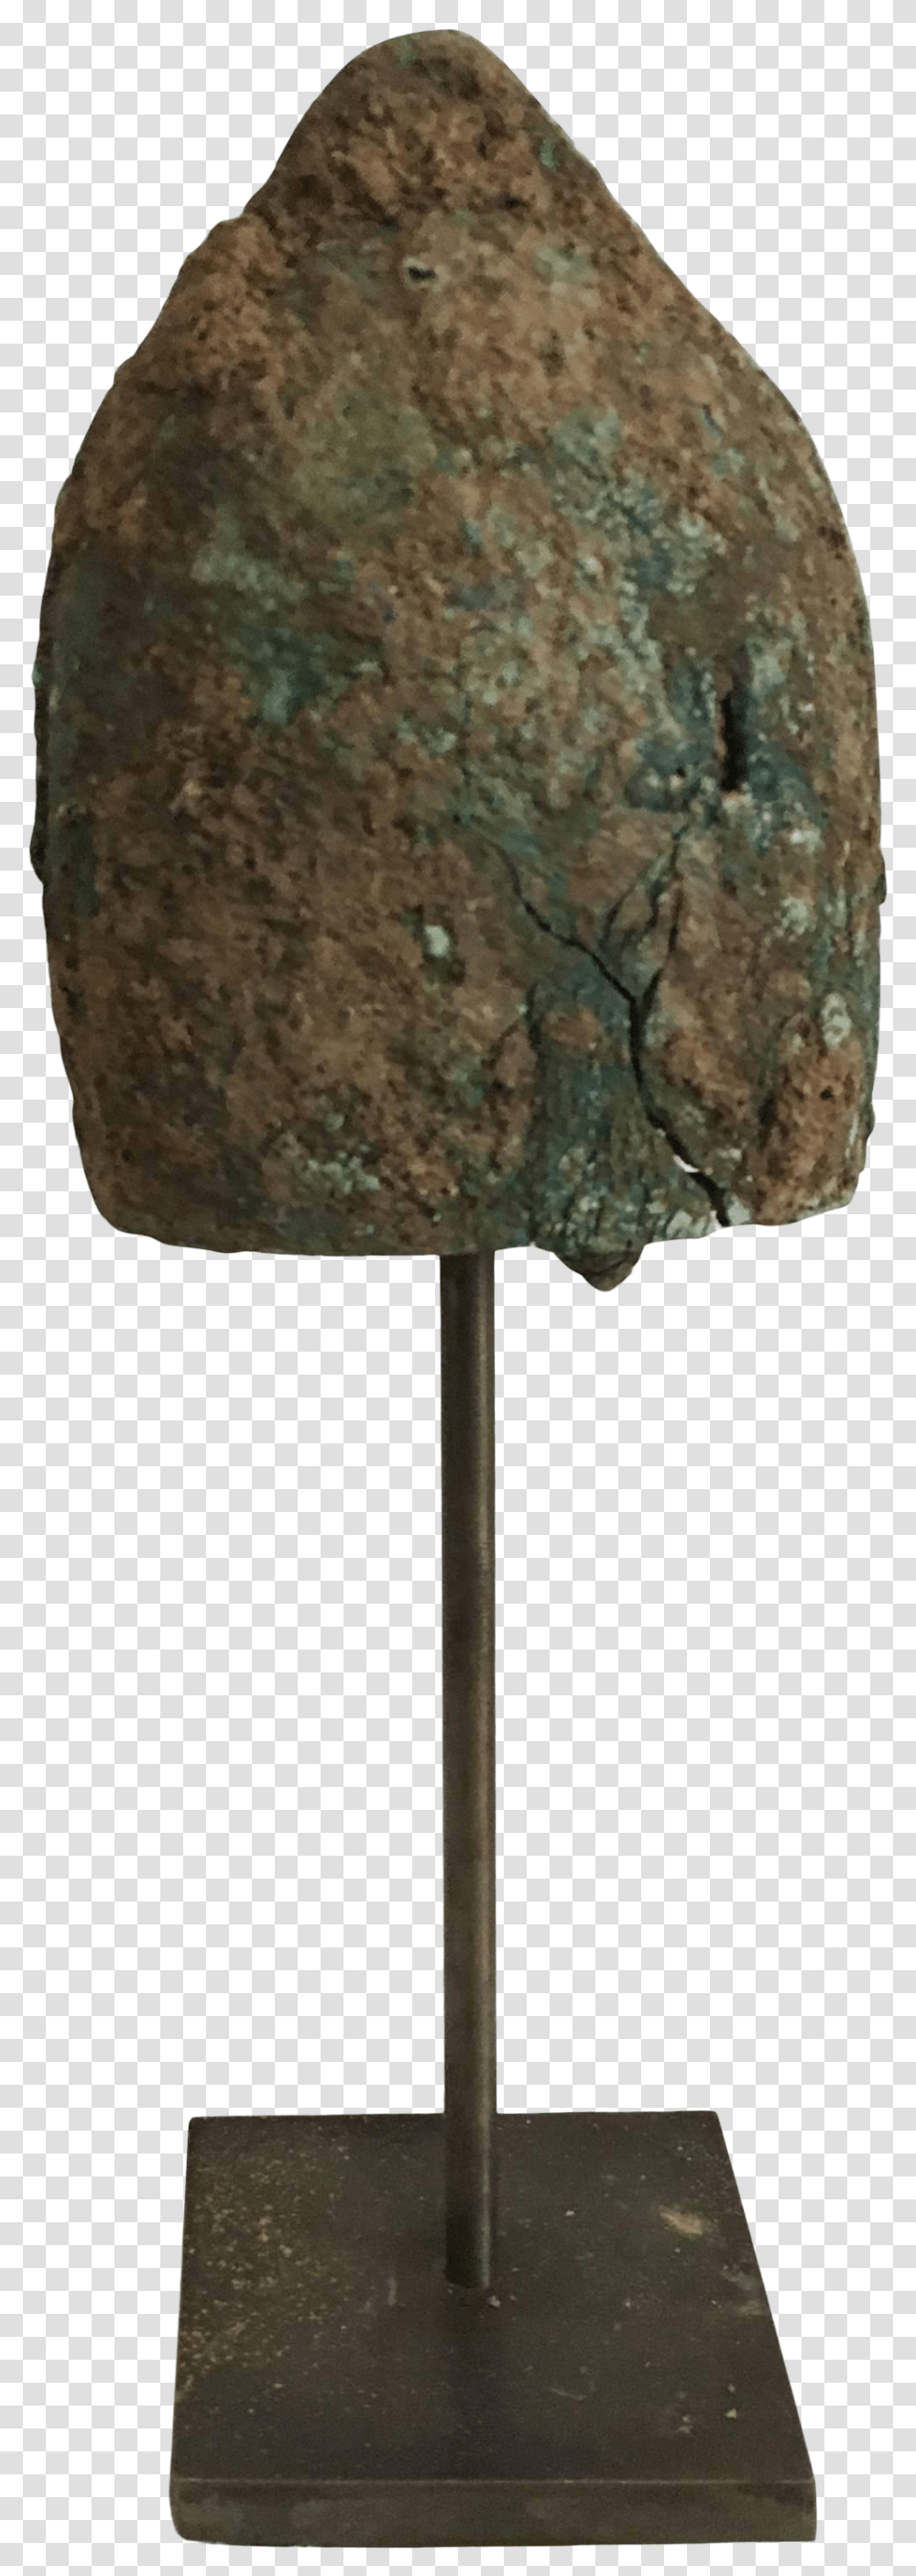 18th Century Or Earlier Bell Excavated From The Central Highlands Vietnam Bronze Sculpture, Lamp, Rock, Lampshade, Clothing Transparent Png